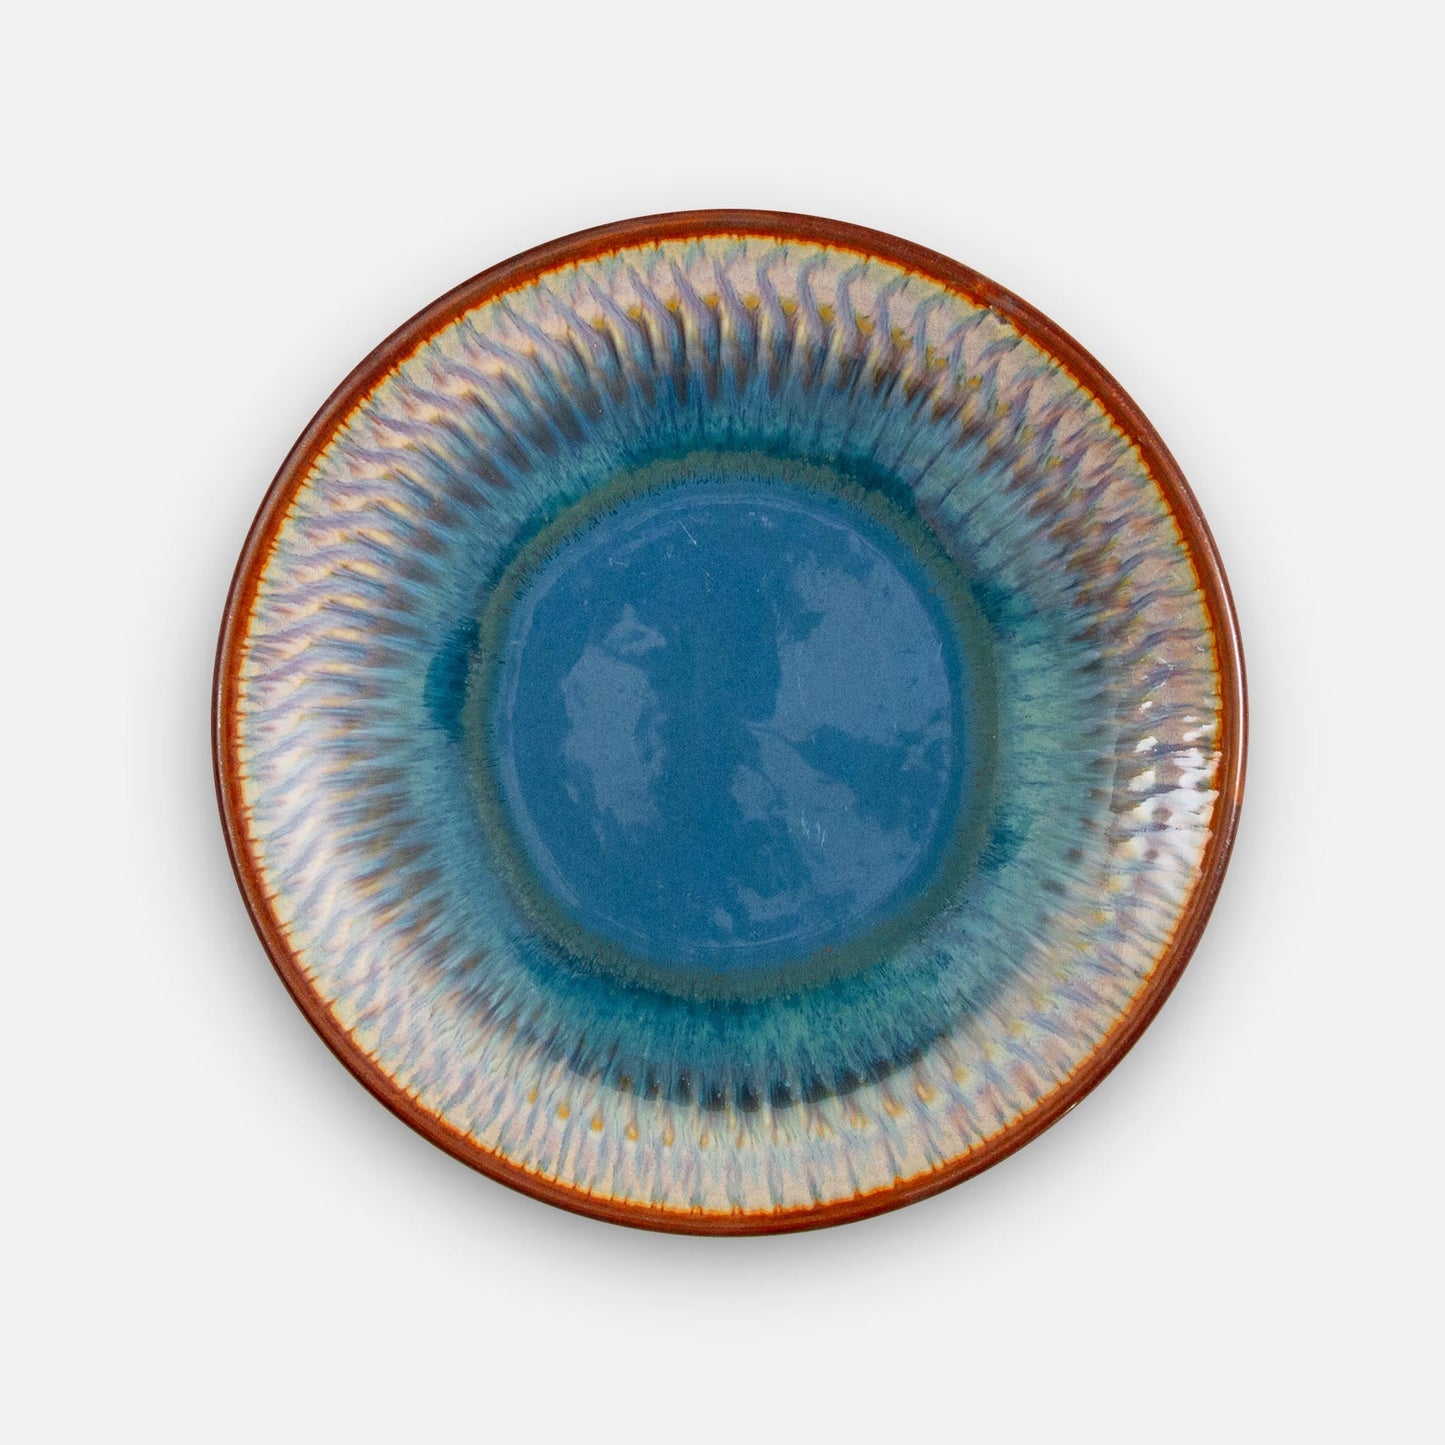 Handmade Pottery Rimless Dessert Plate made by Georgetown Pottery in Maine in Blue Oribe Pattern